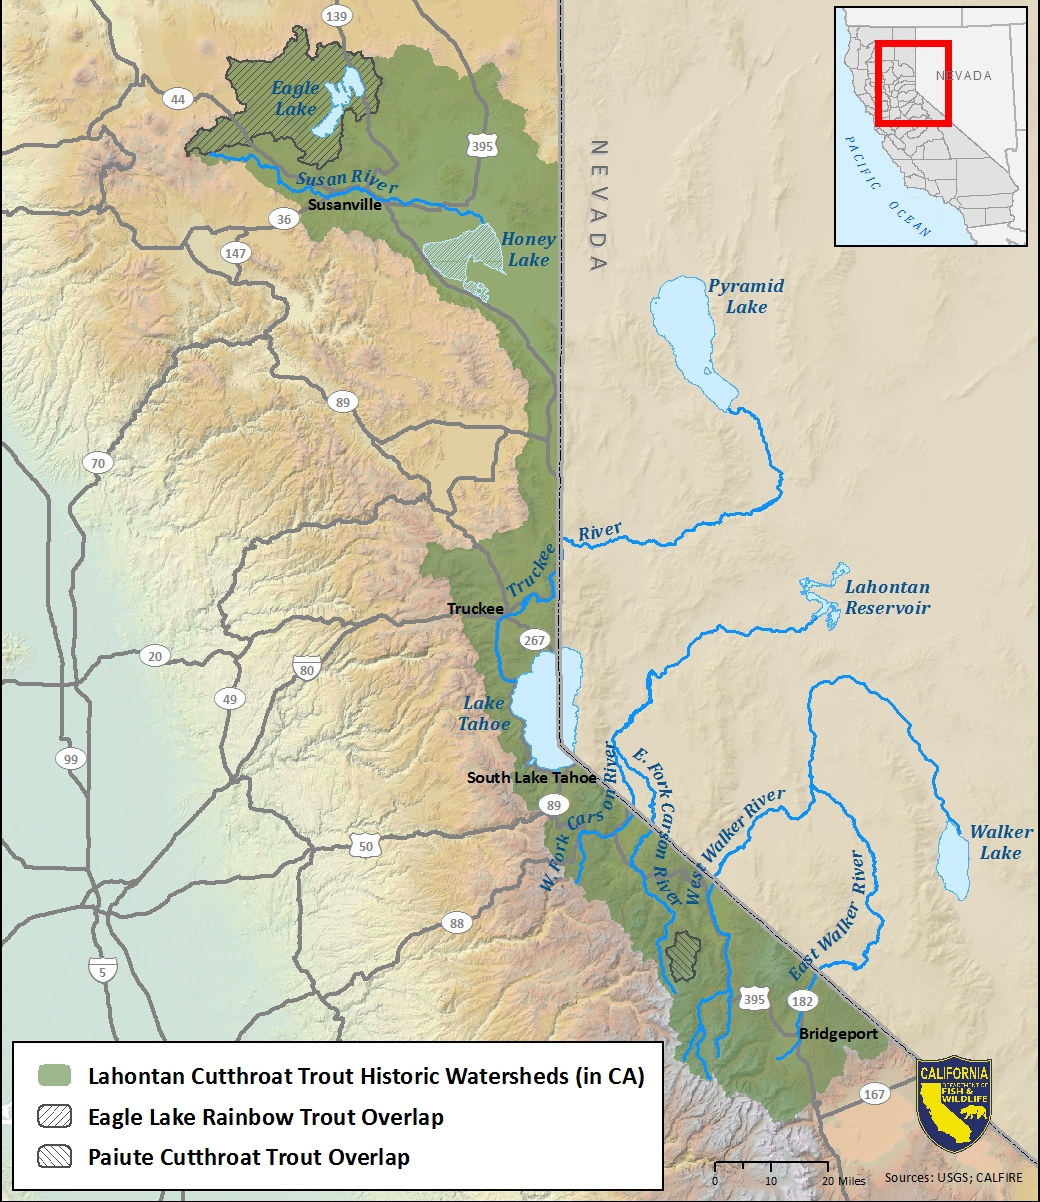 Map of Lahontan cutthroat trout historic watersheds-link opens in new window